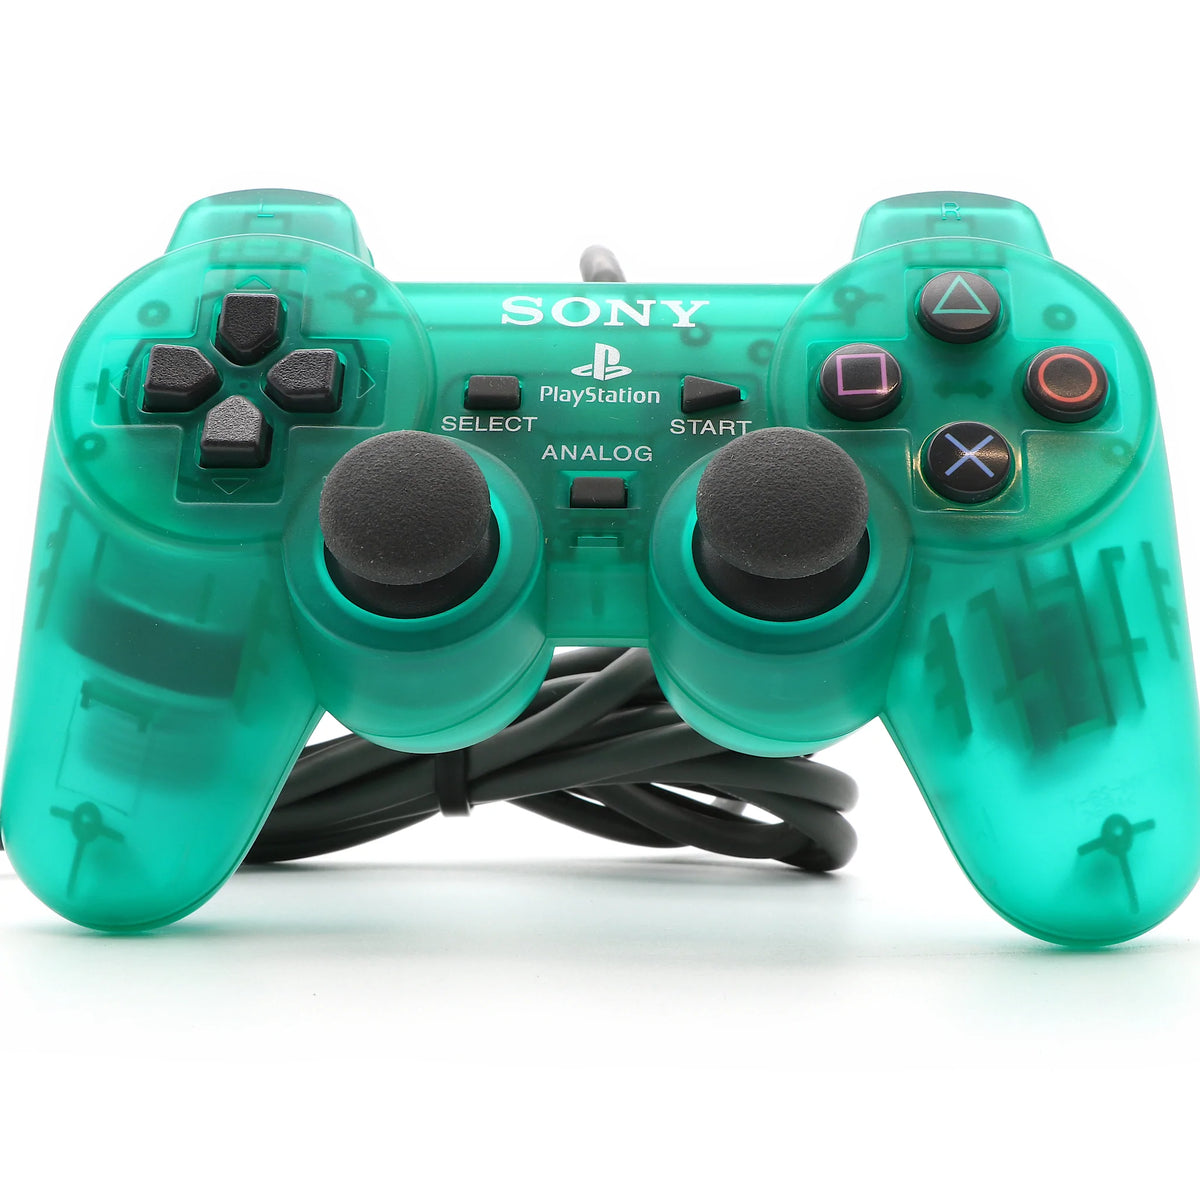 Sony Playstation 1 / PSX / PSOne Dual shock controller Emerald Green Gamesellers.nl